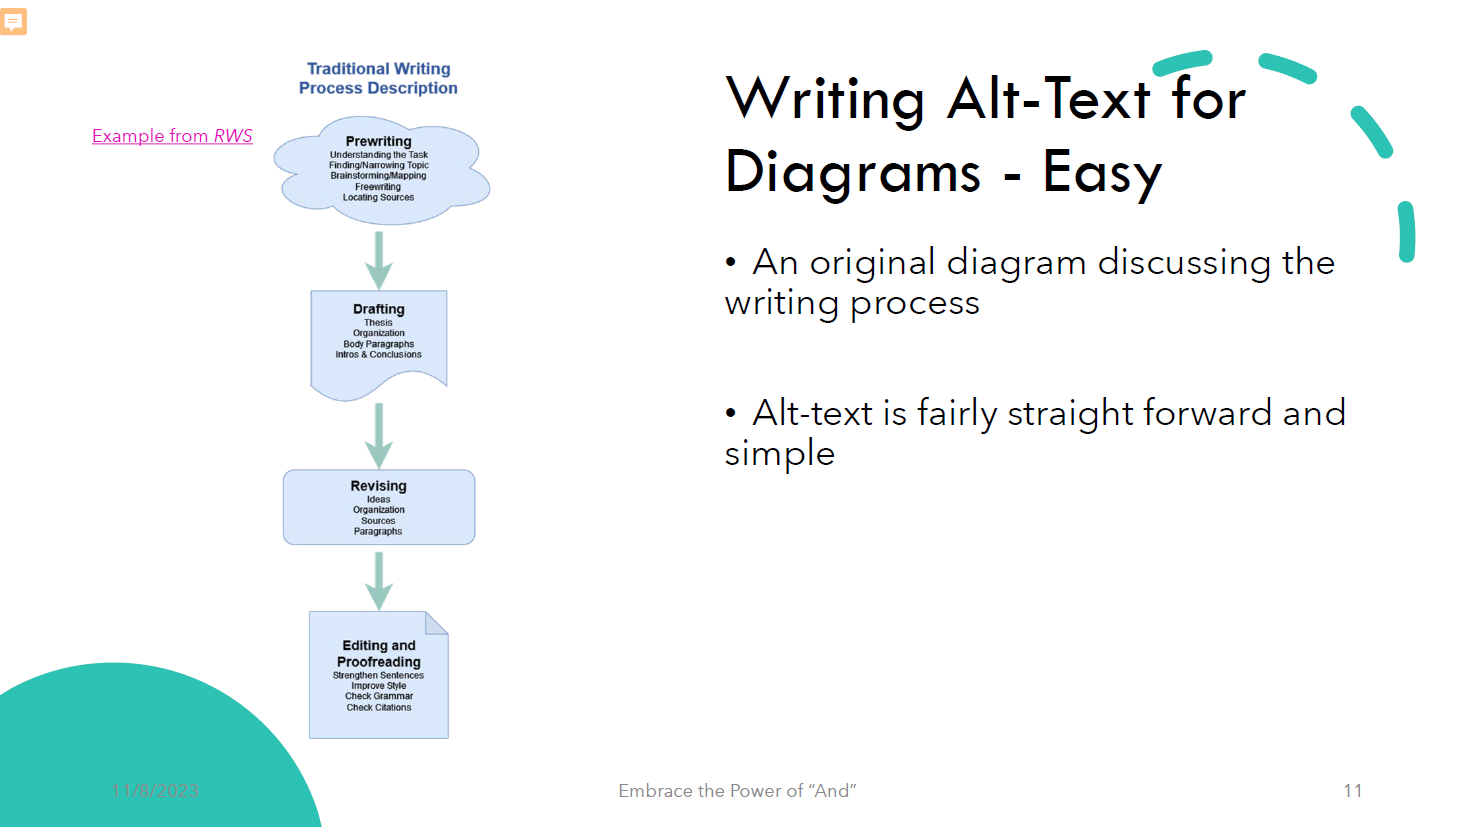 Screenshot of slide depicting a straightforward workflow diagram that is easy to write alt-text for, from presentation: Embrace the Power of 'And'. Licensed CC BY SA.